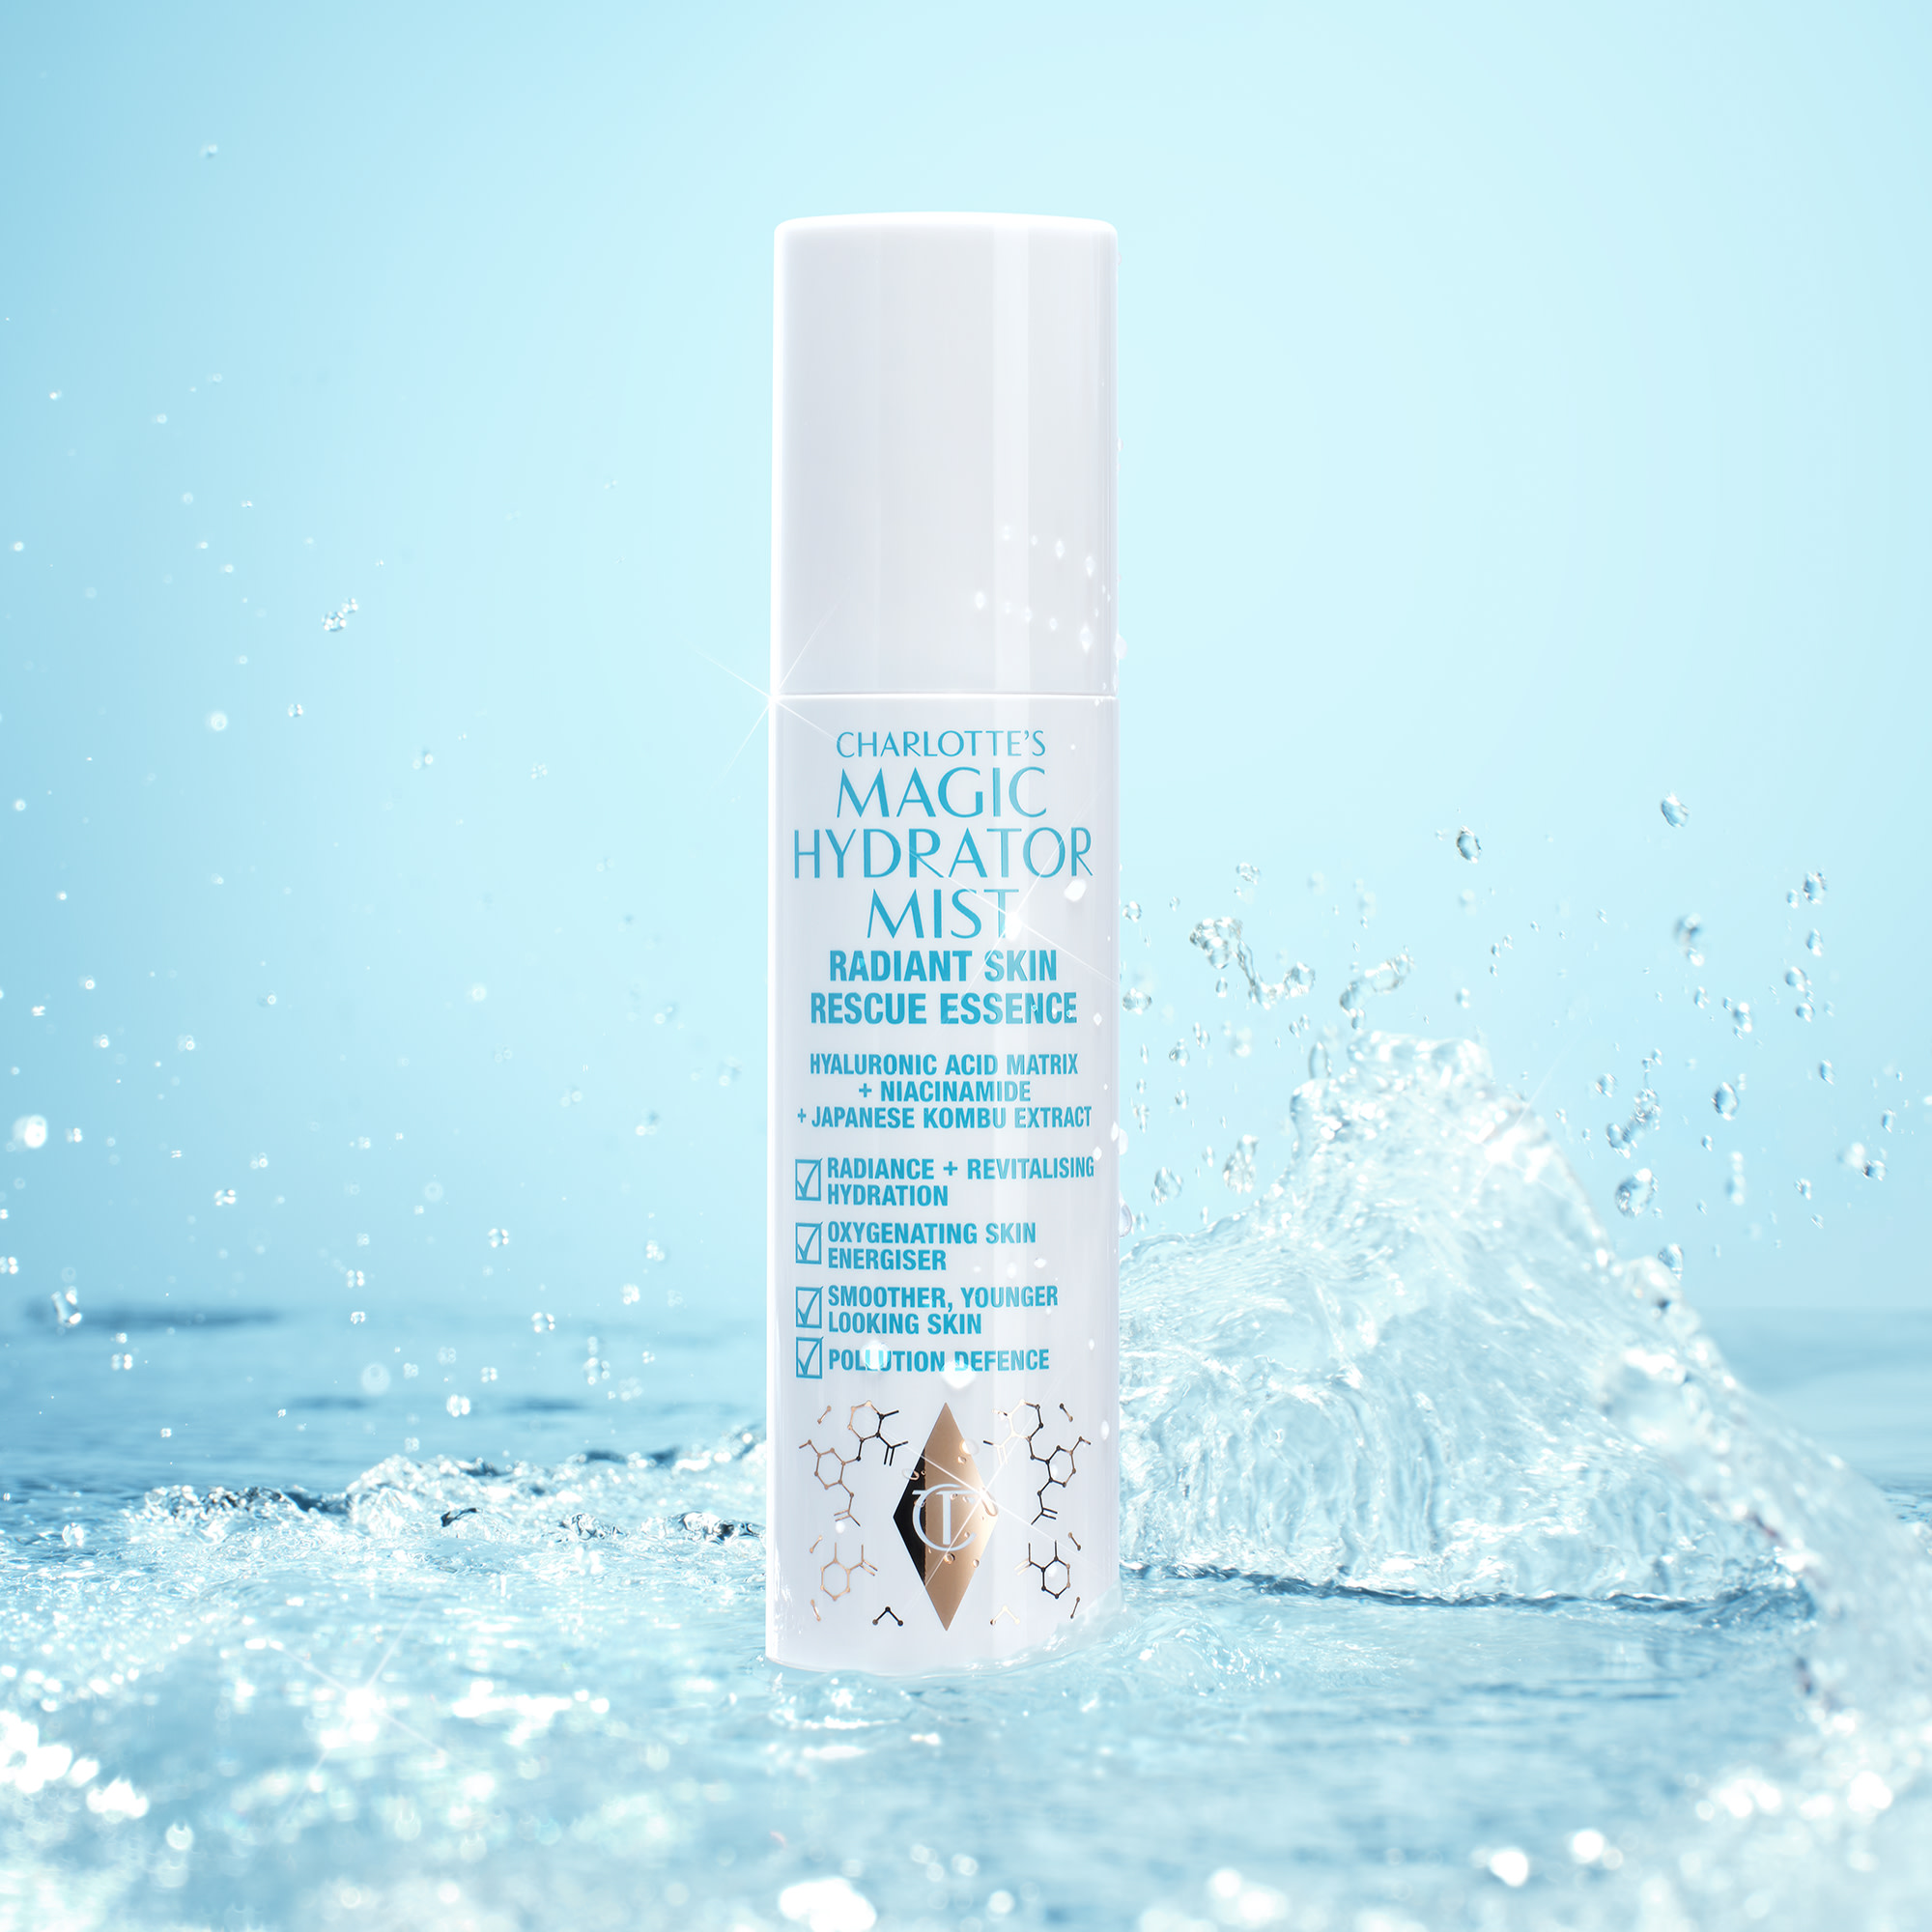 Charlotte's Magic Hydrator Mist radiant skin rescue essence submerged in water